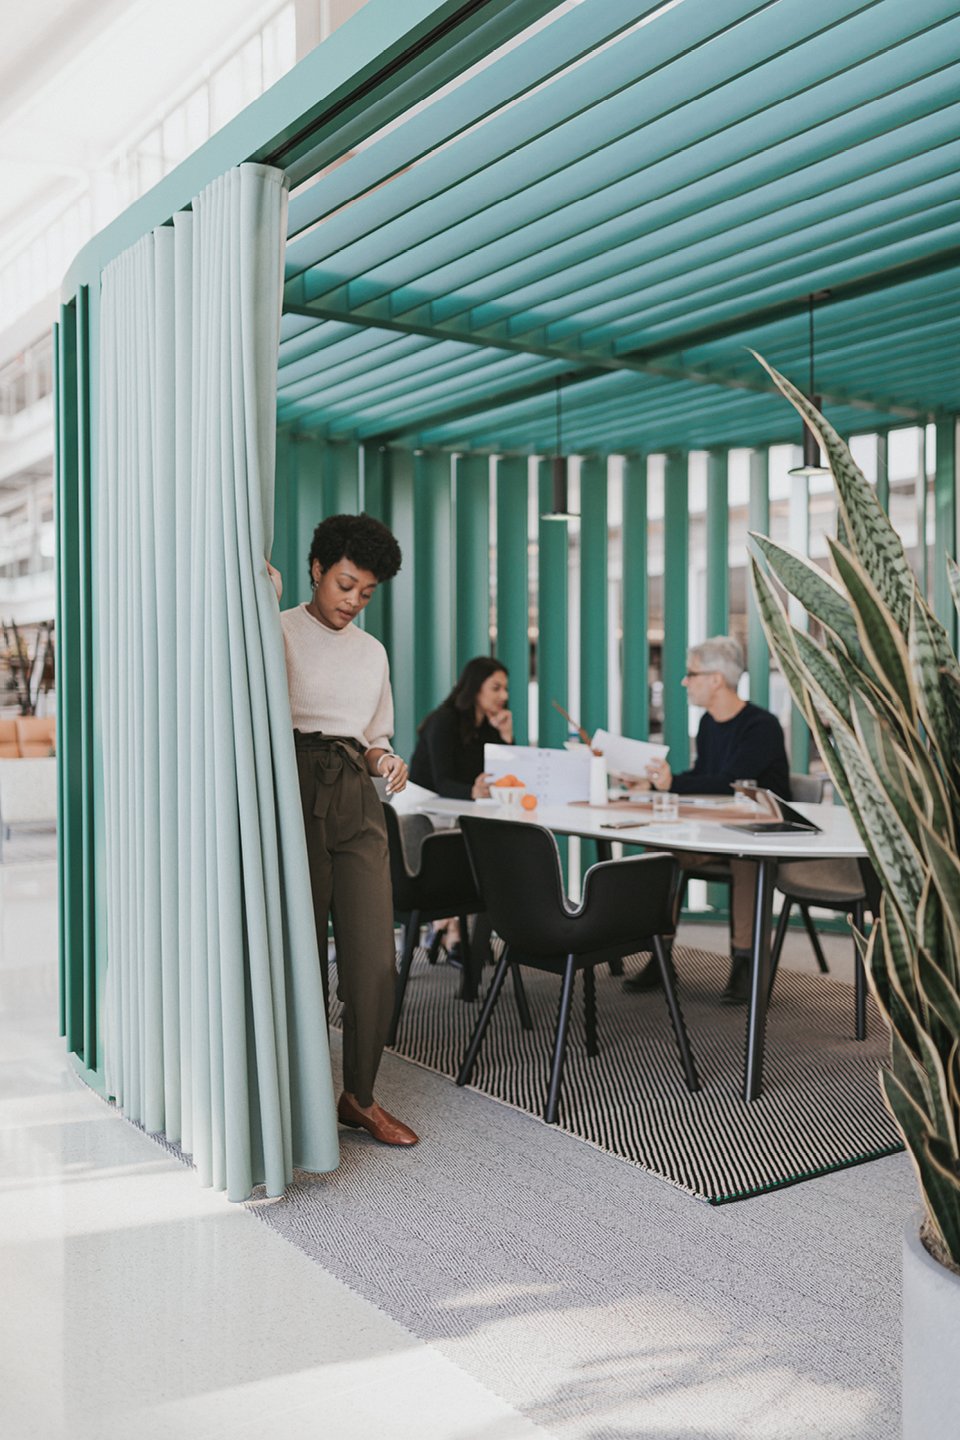 Haworth Pergola Workspace with blue trip and light blue curtain being closed for privacy while employees work at desk in open office space